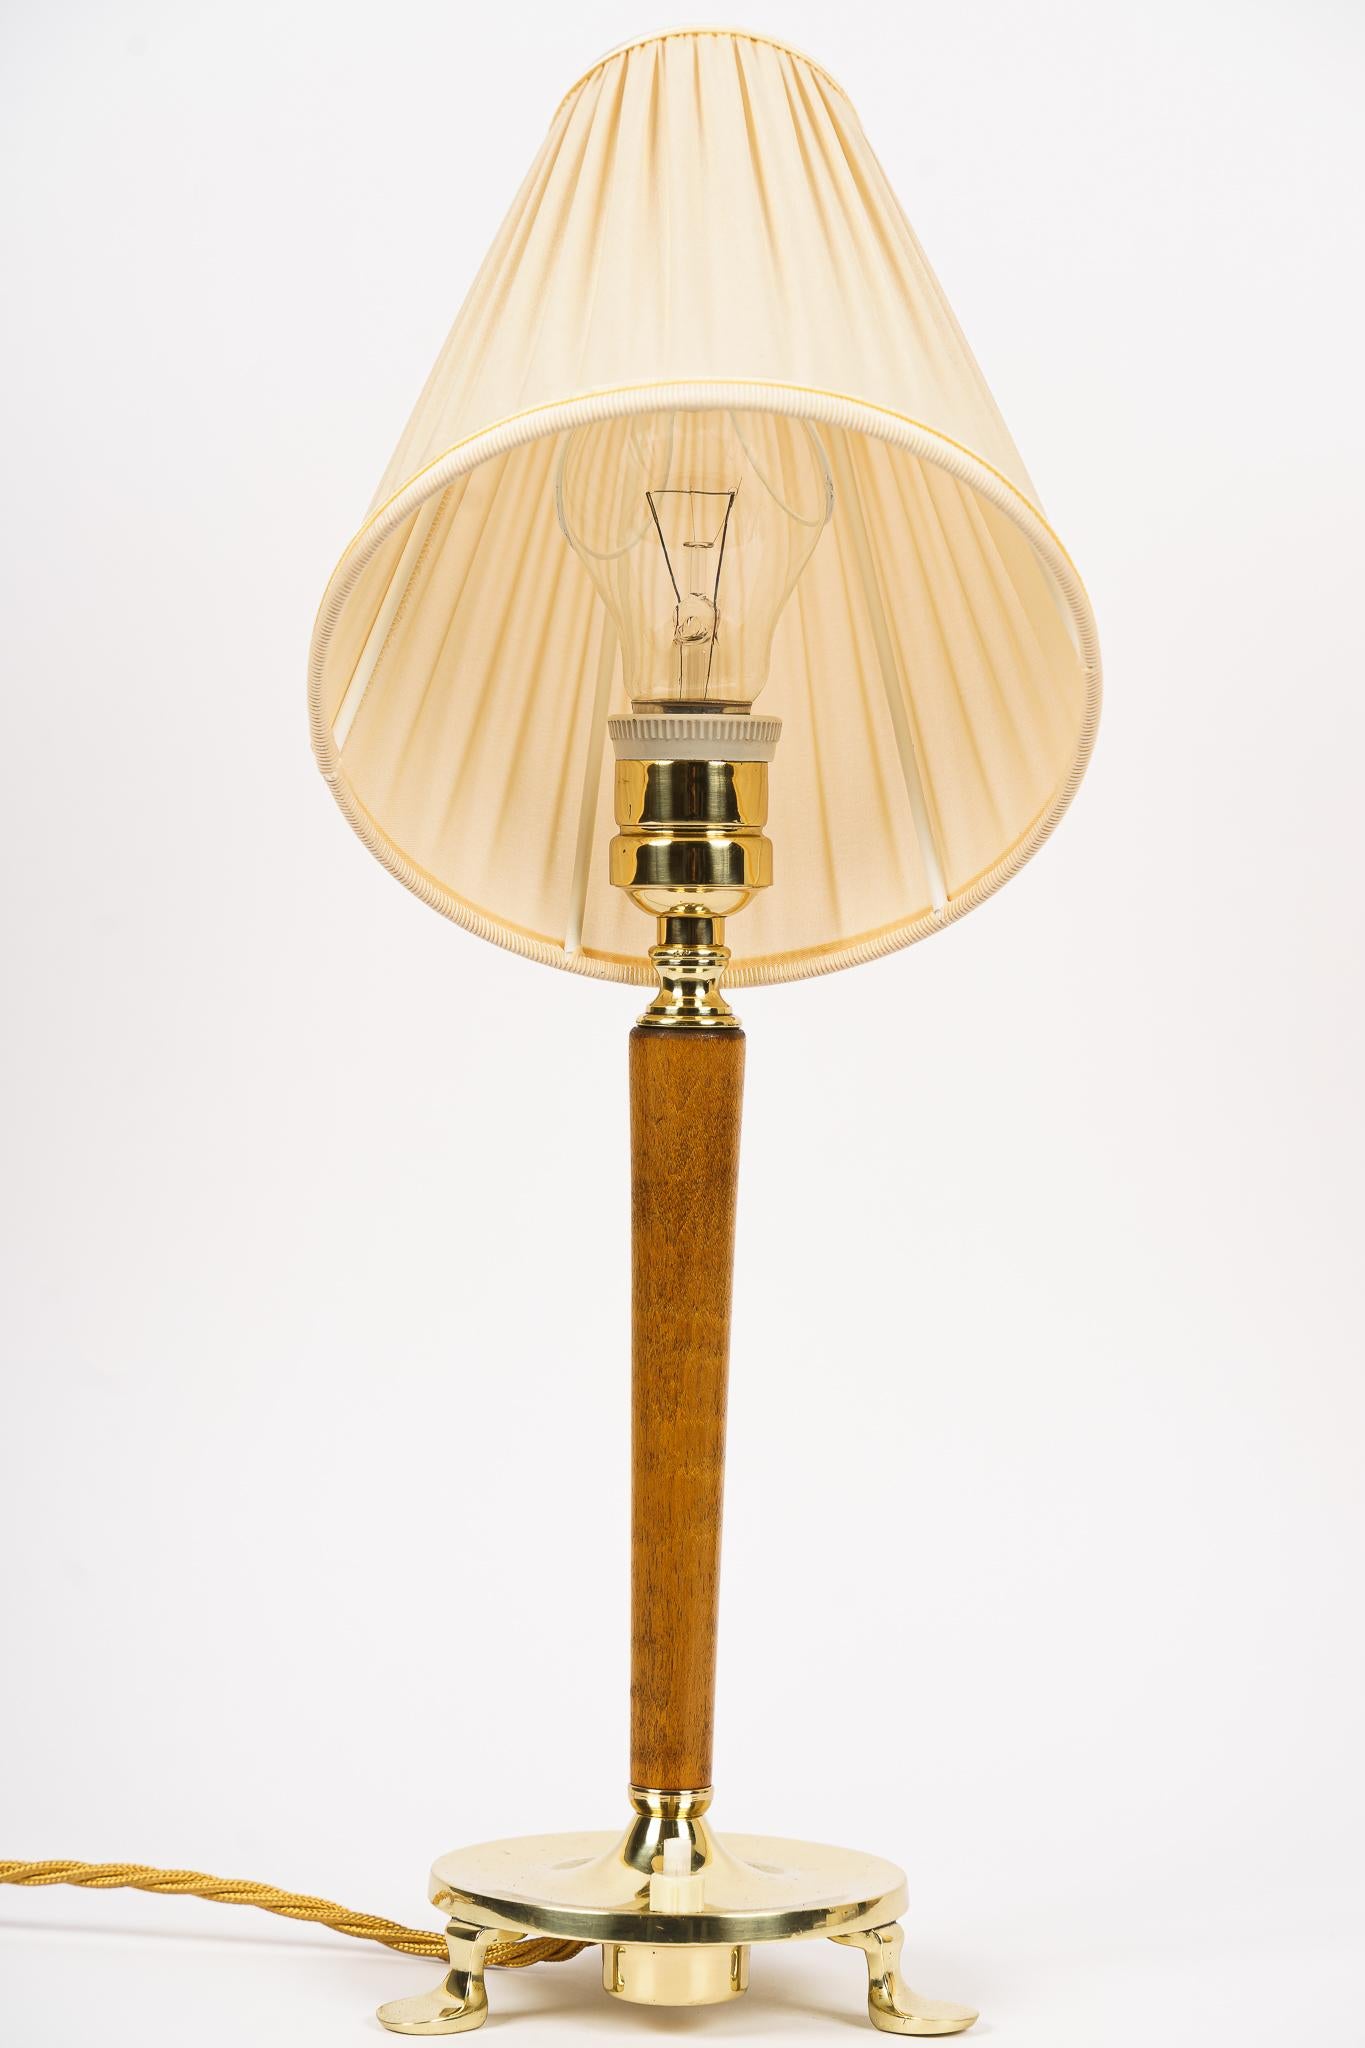 Lacquered Rupert Nikoll Table Lamp with Fabric Shade Around 1950s For Sale